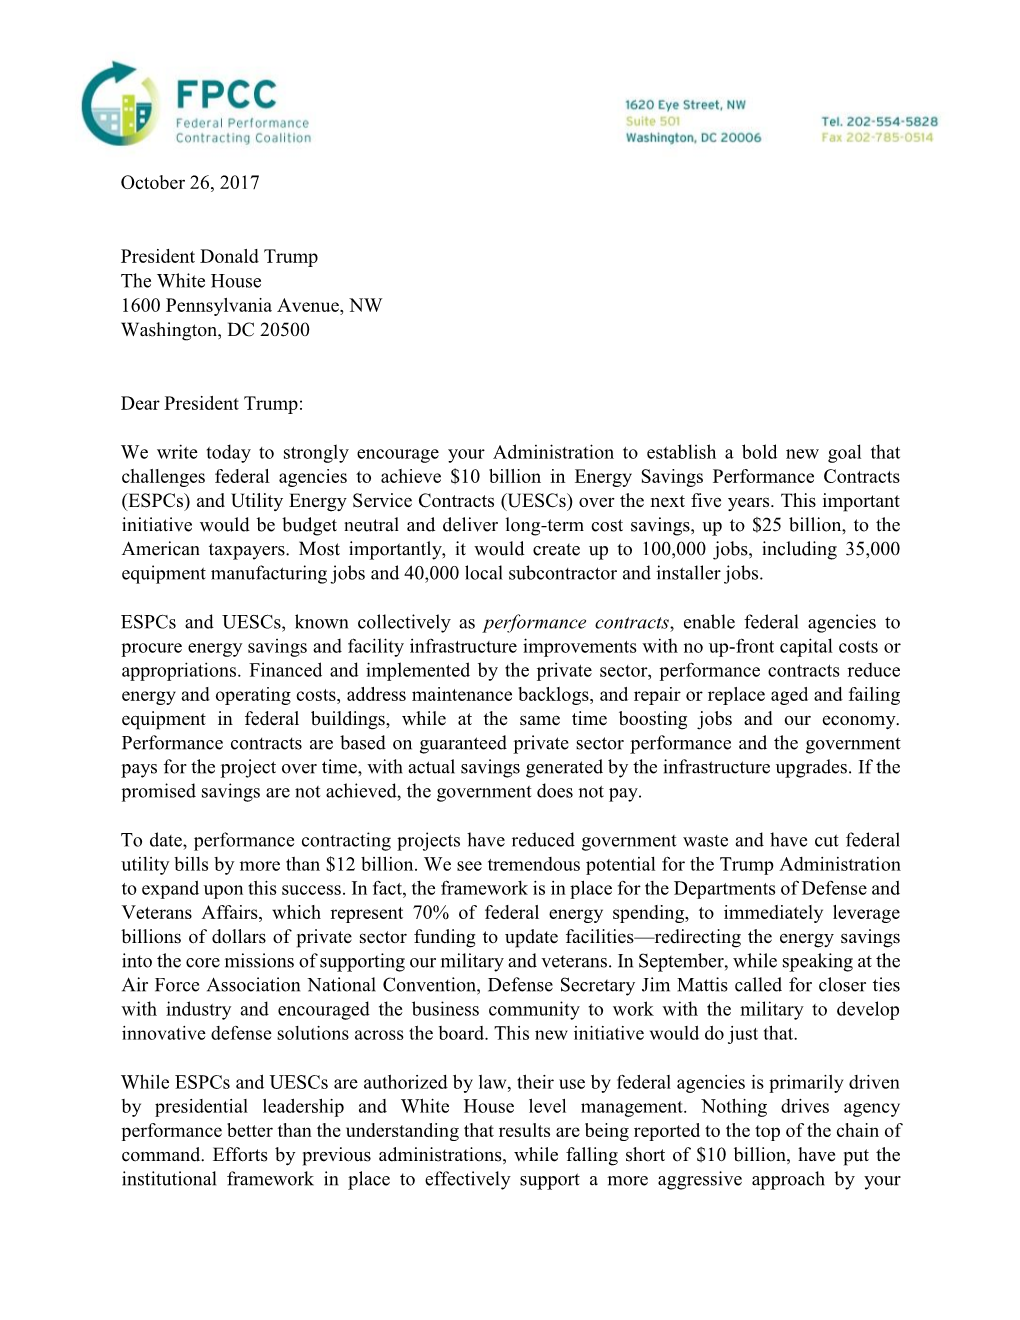 10-26-17 Letter to President Trump Encouraging Bold Initiative